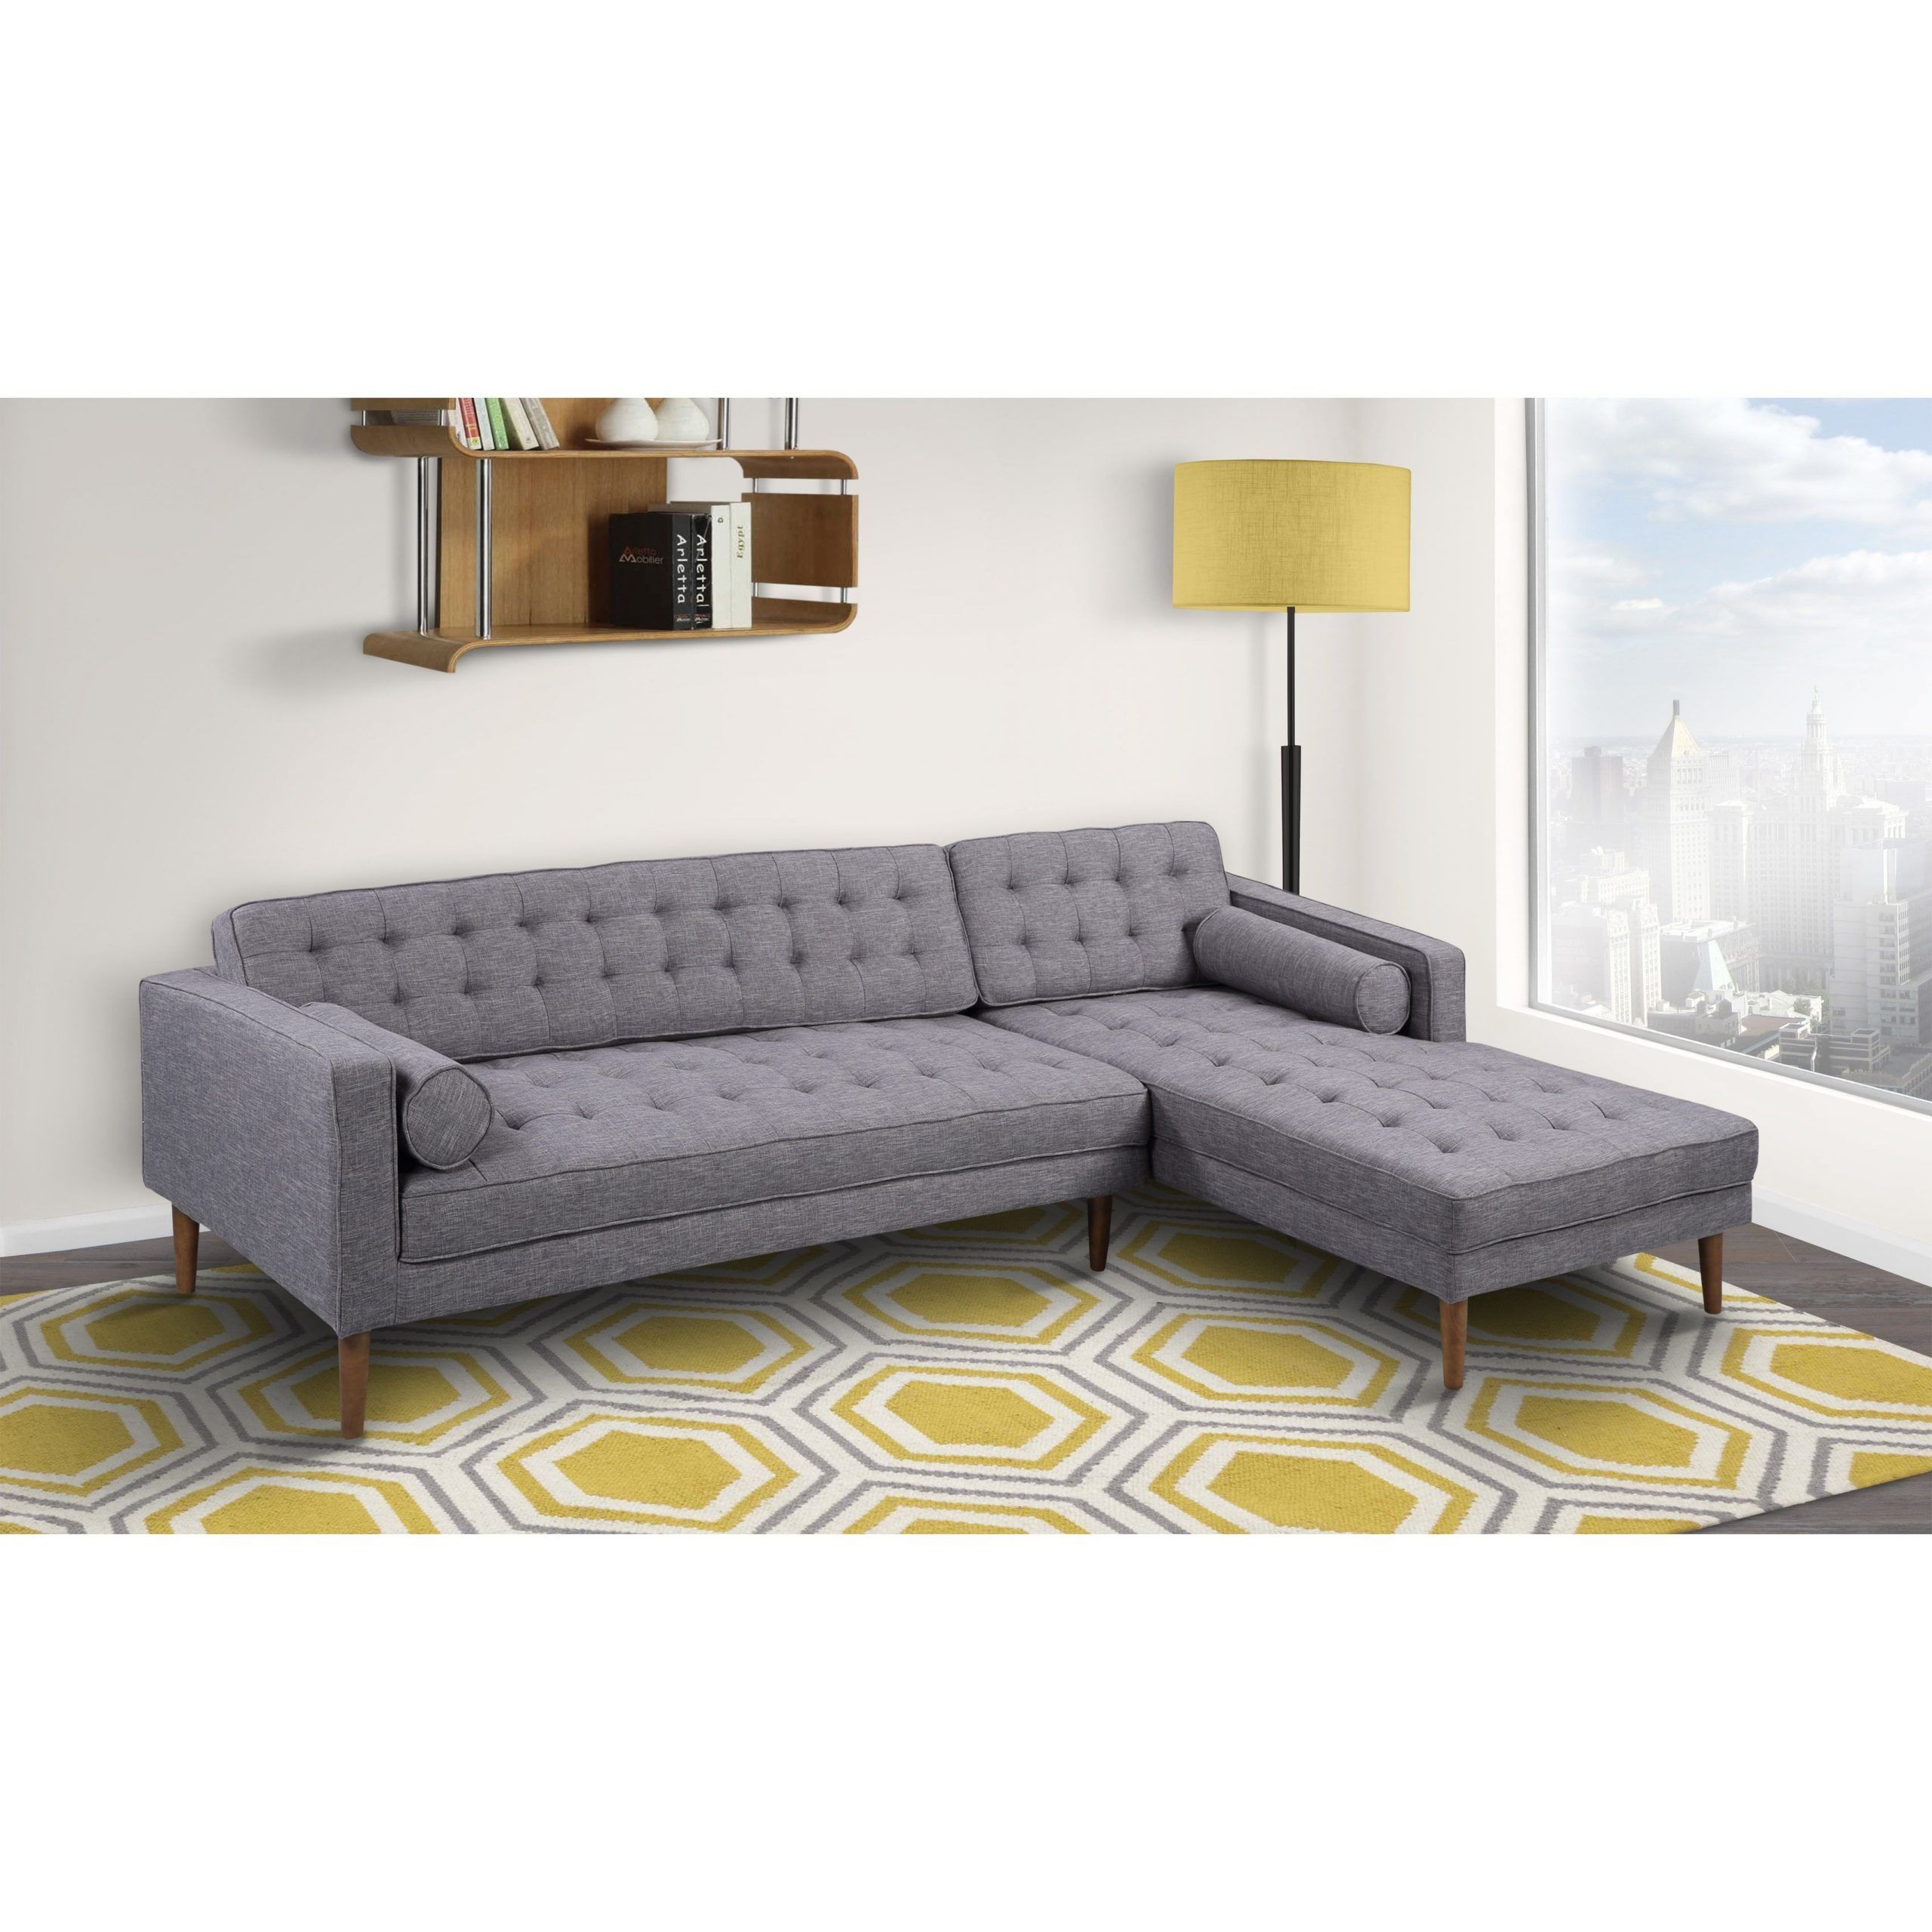 Armen Living Element Tufted Dark Grey Linen Sectional Sofa With Regard To Element Left Side Chaise Sectional Sofas In Dark Gray Linen And Walnut Legs (View 3 of 15)